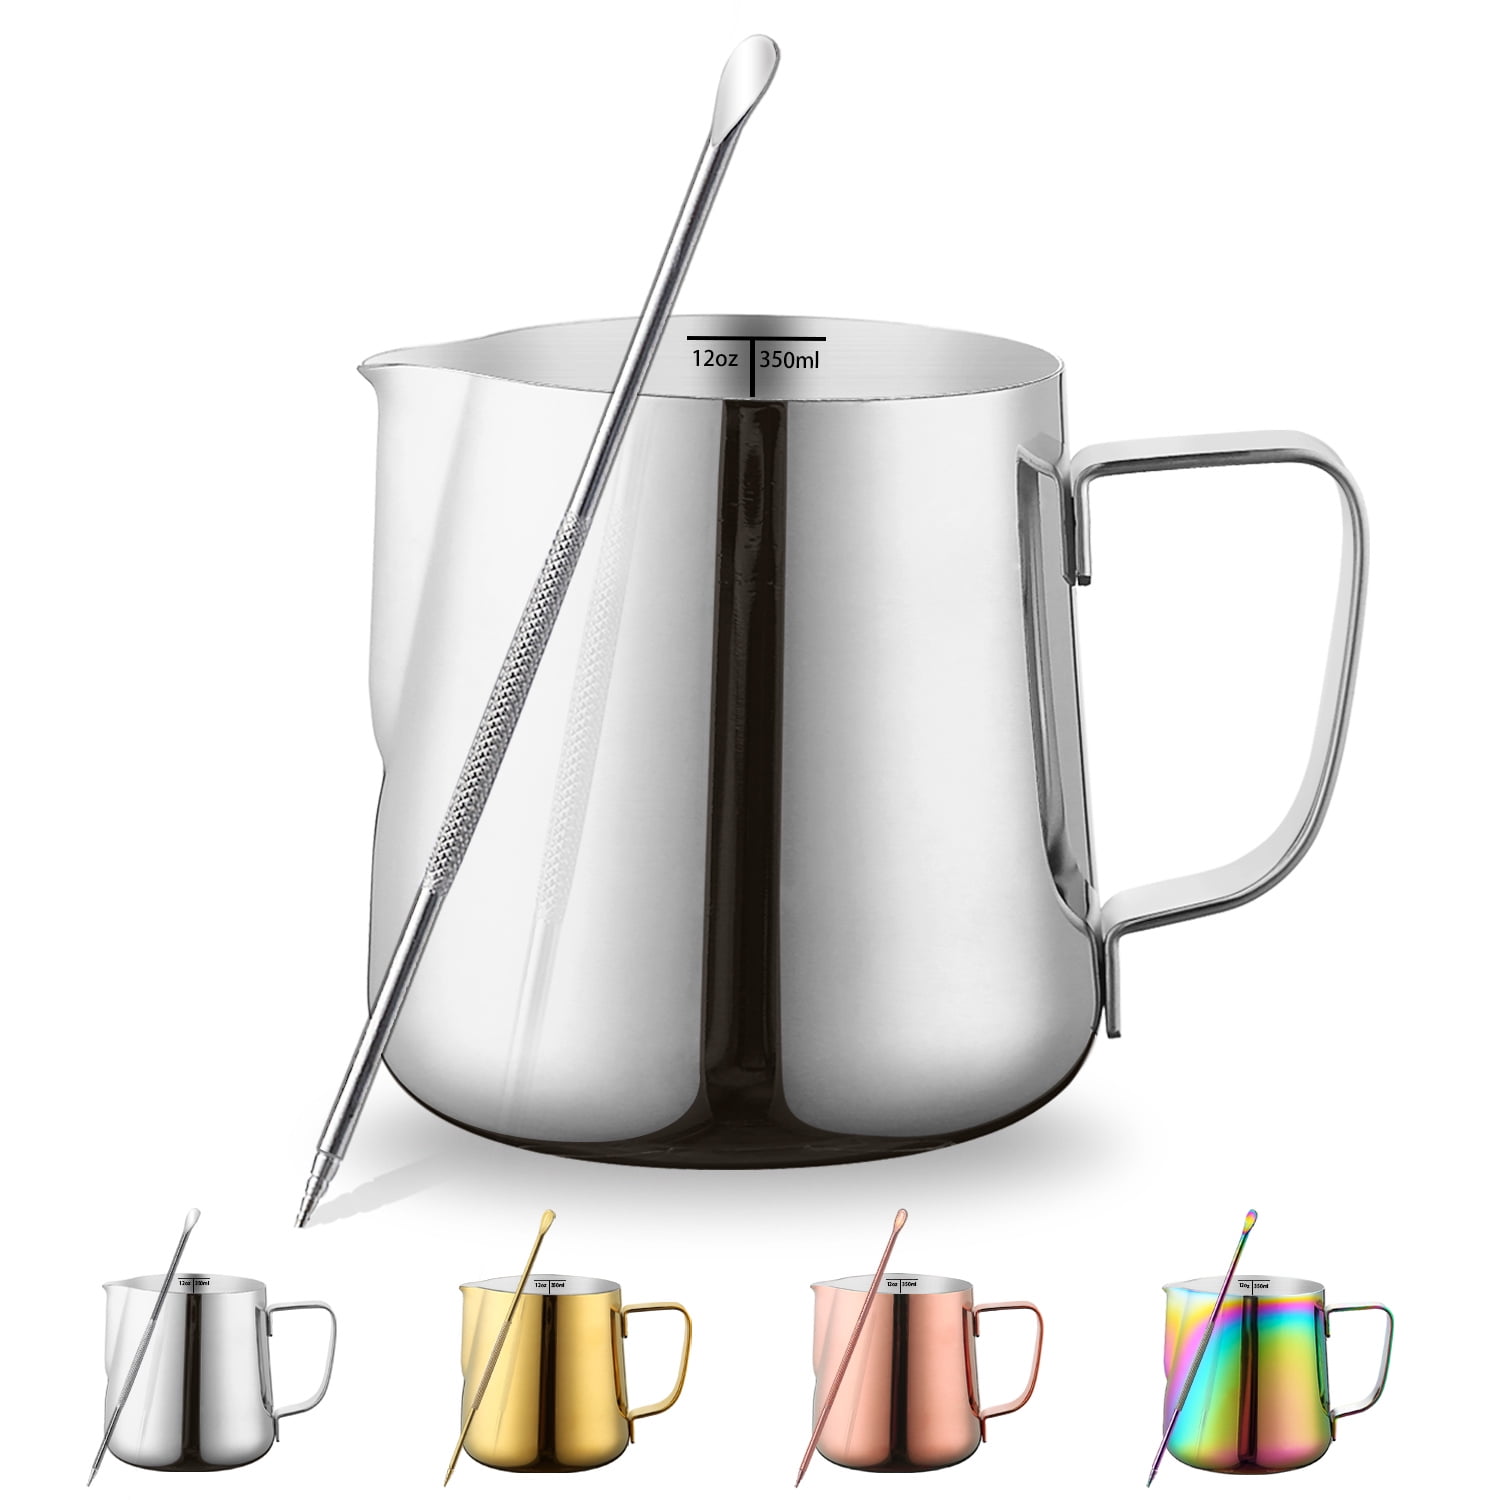 Milk Frothing Pitcher, Milk Frother Cup Stainless Steel, Espresso Steaming Pitcher 10 oz (300 ml), Size: 10oz, Silver